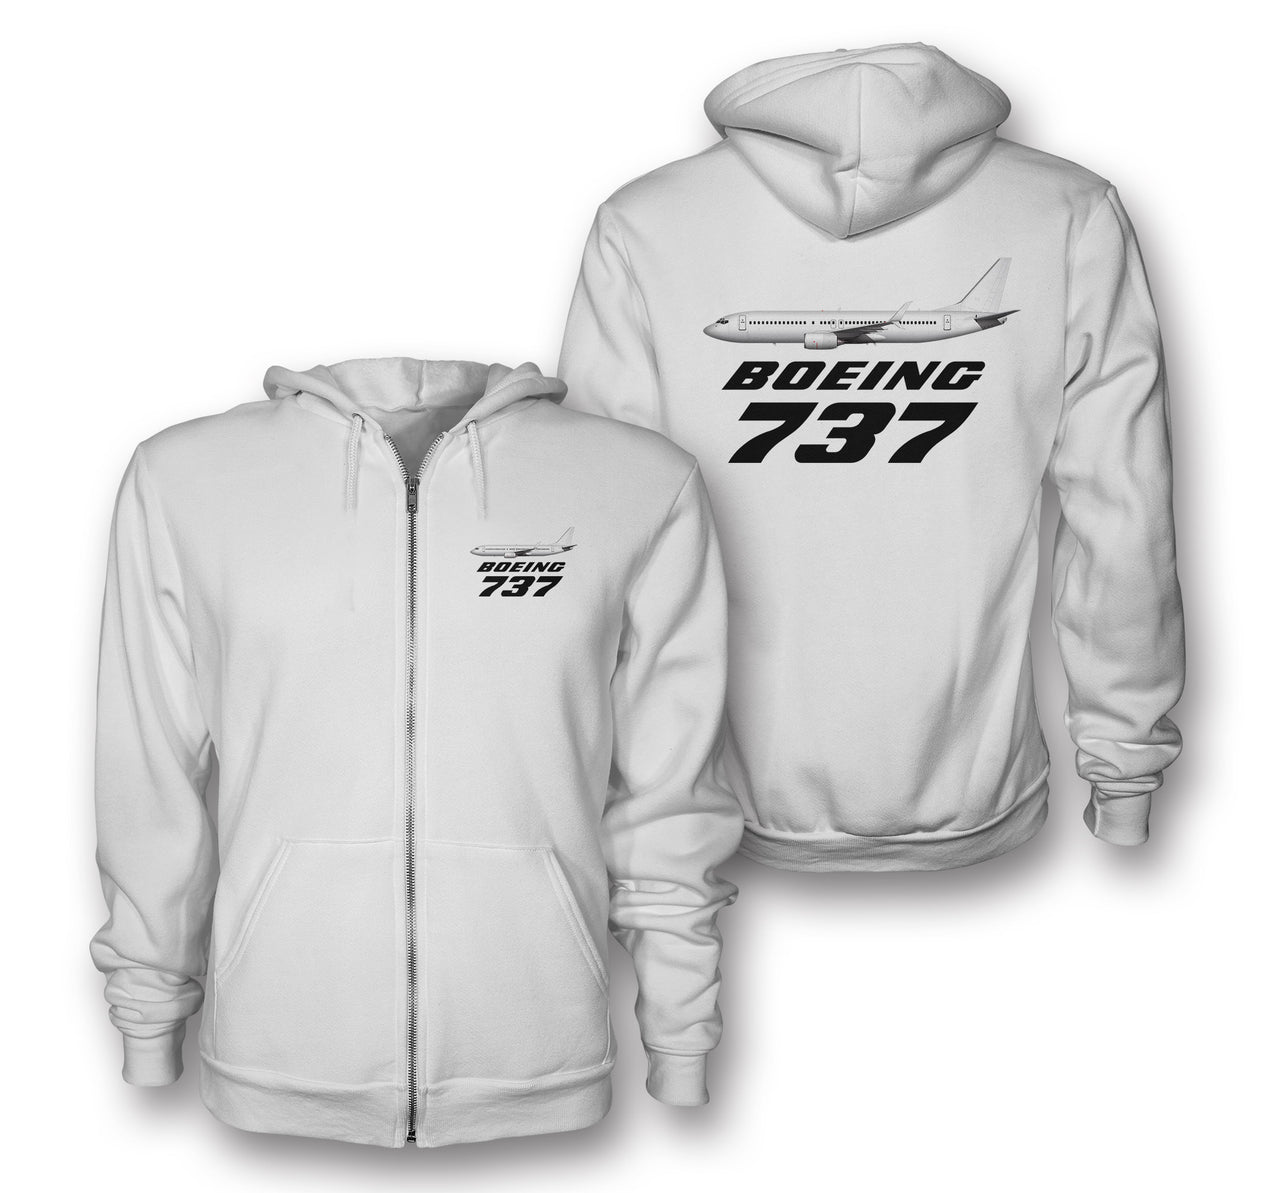 The Boeing 737 Designed Zipped Hoodies